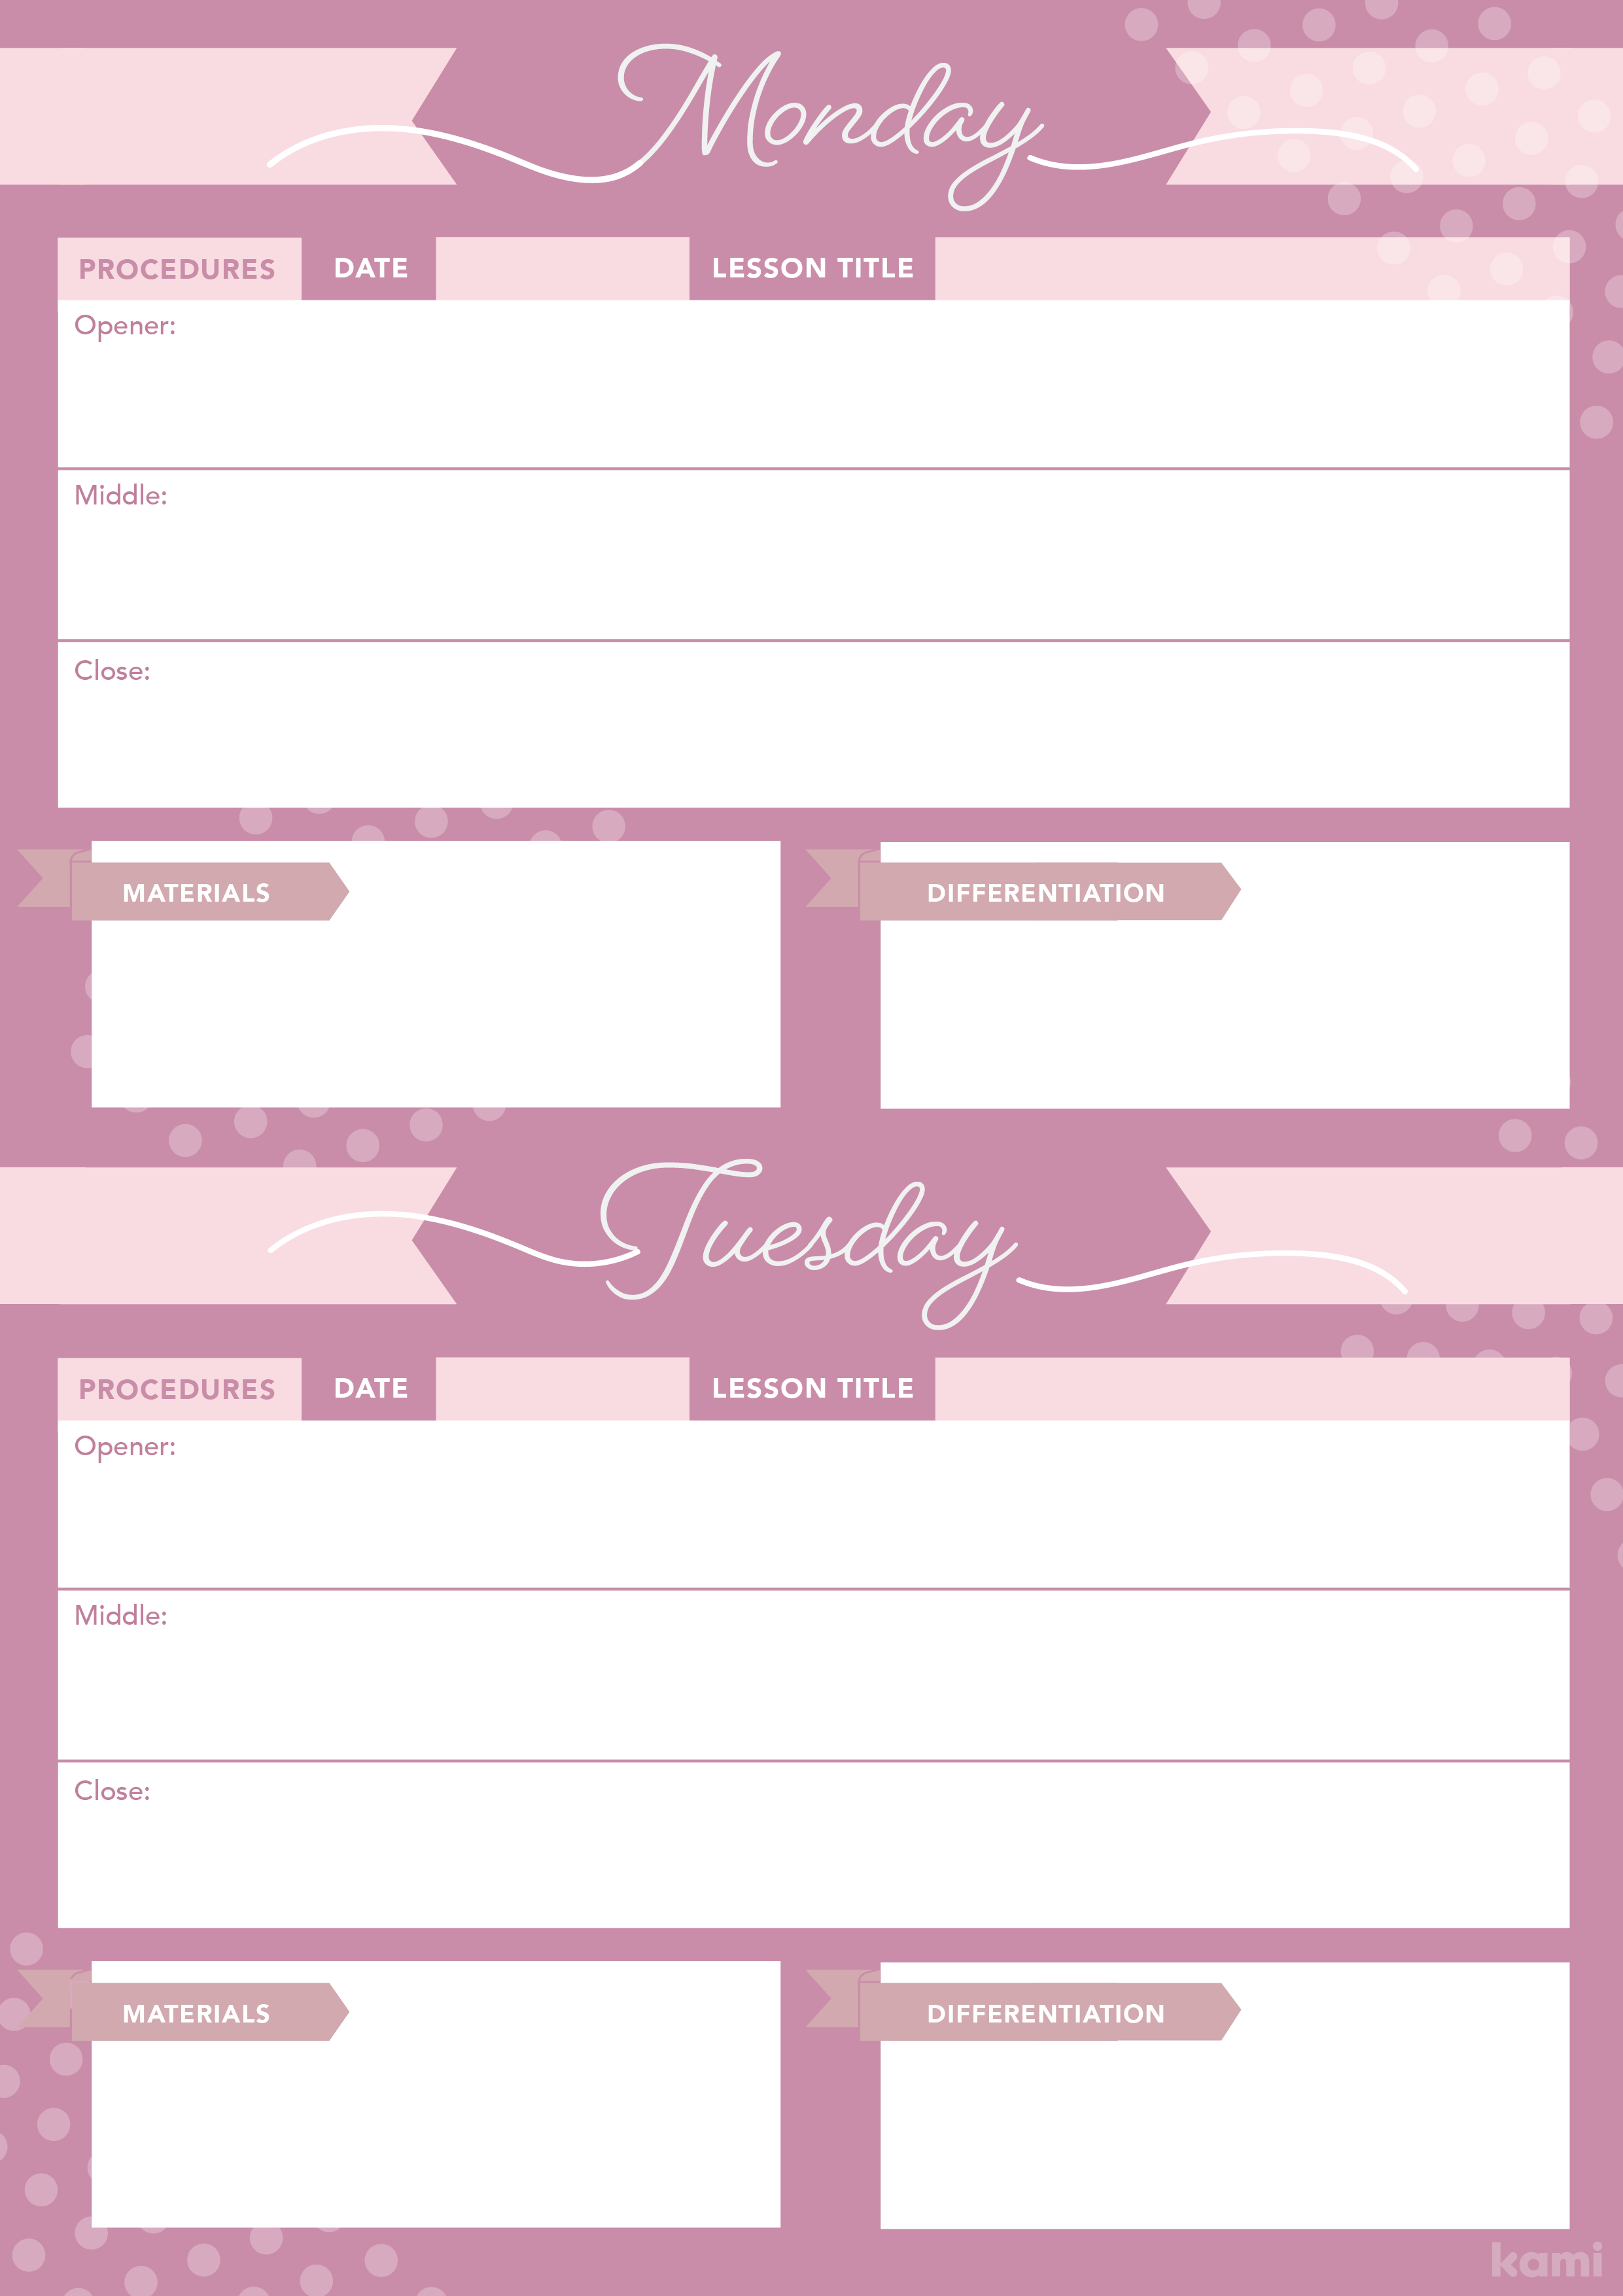 A Weekly Overview Lesson Plan for Teachers with a Pink Theme